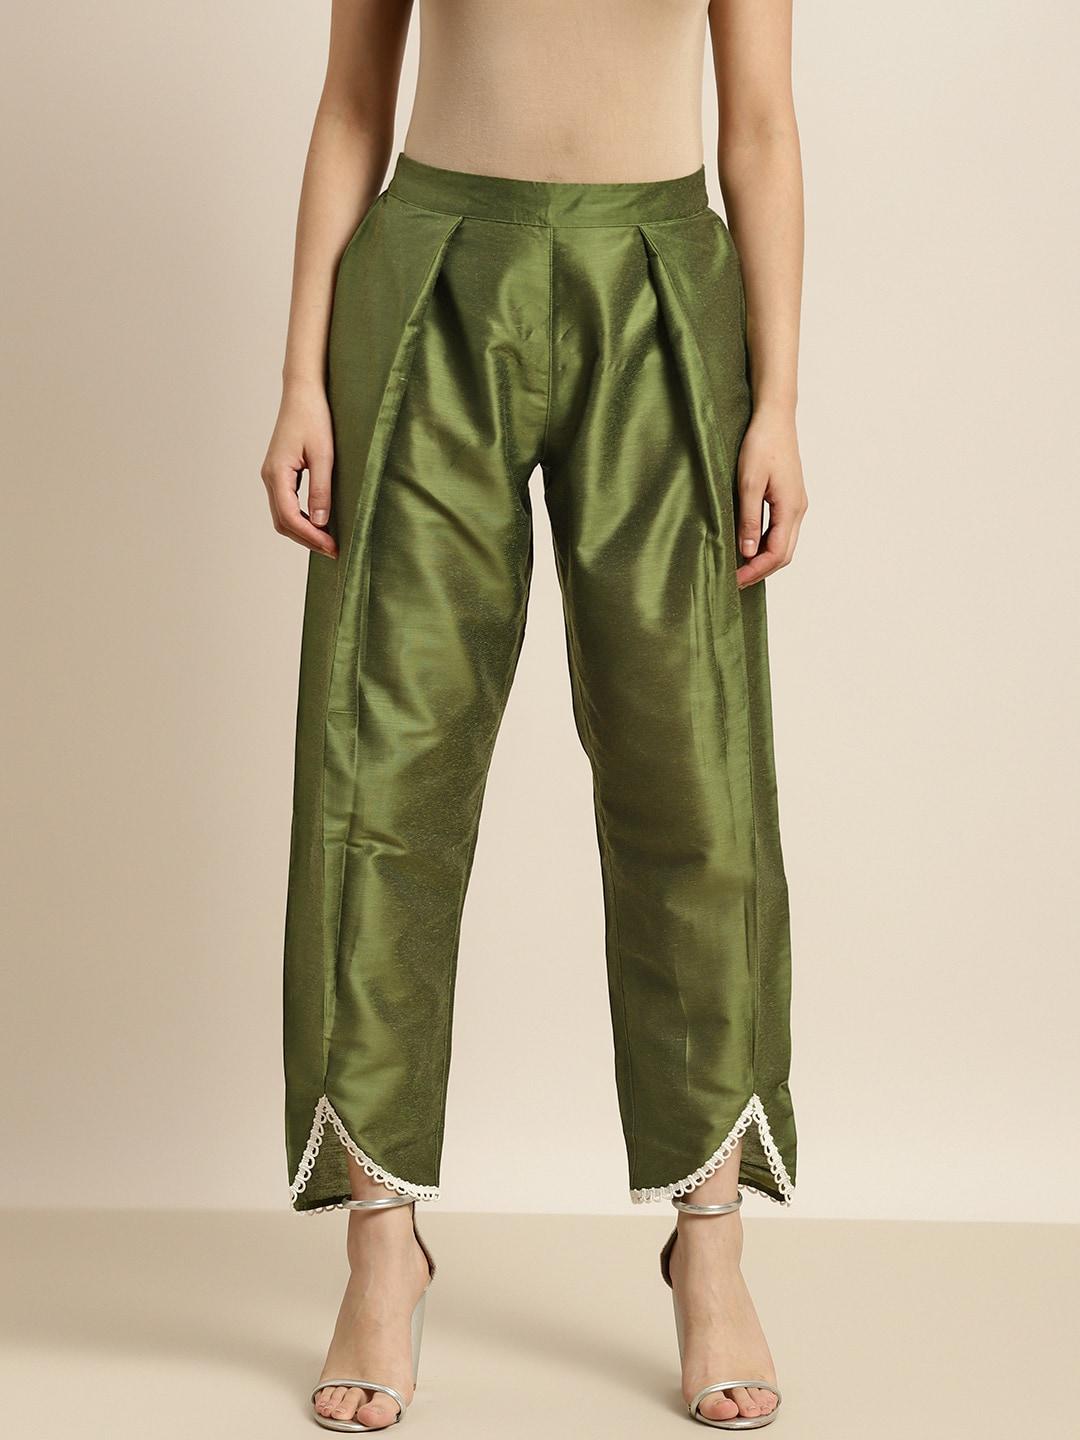 shae-by-sassafras-women-olive-green-comfort-trousers